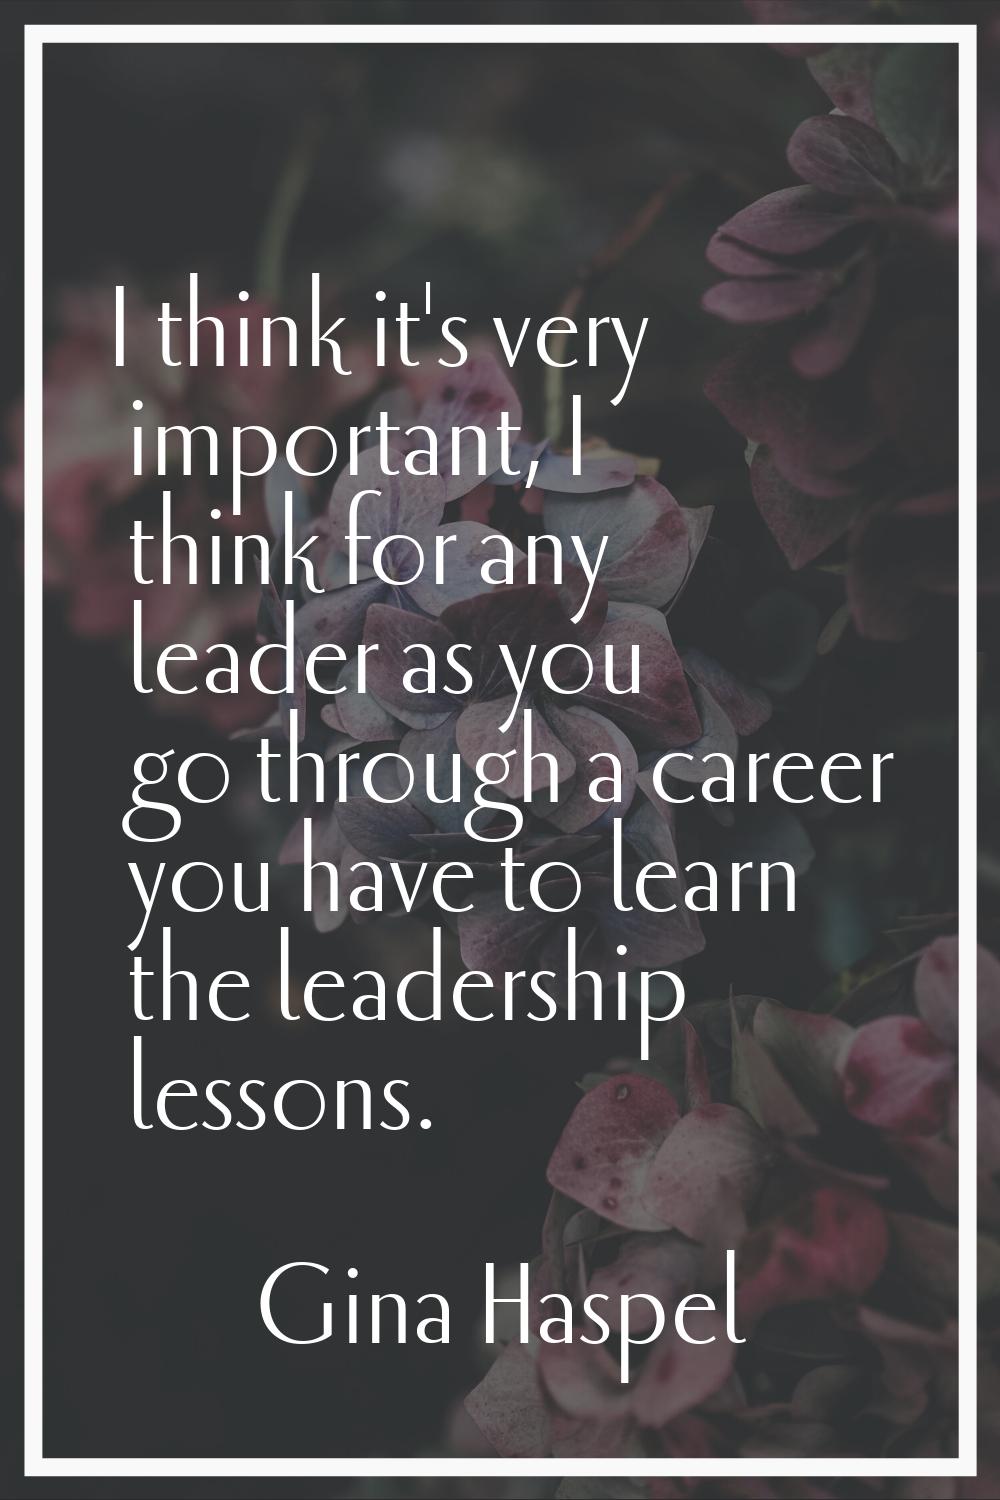 I think it's very important, I think for any leader as you go through a career you have to learn th